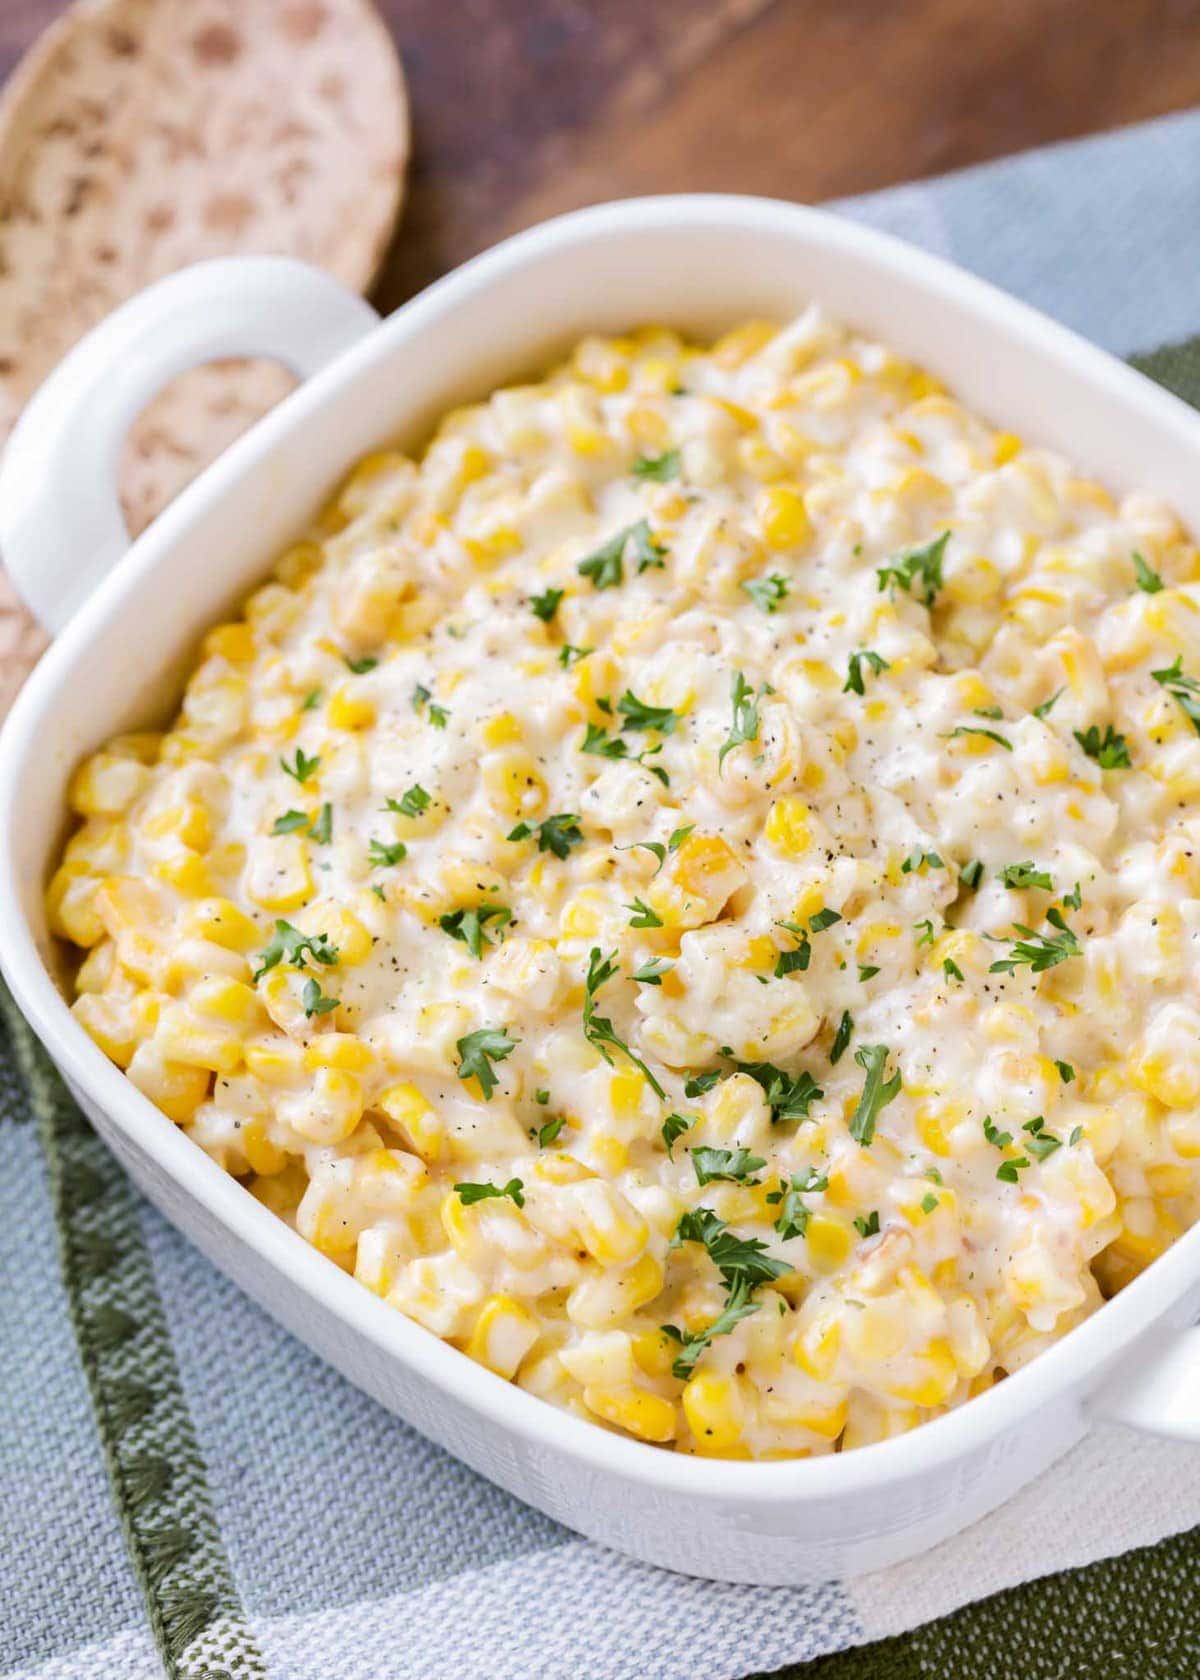 Creamed corn recipe served in a baking dish, topped with fresh herbs.